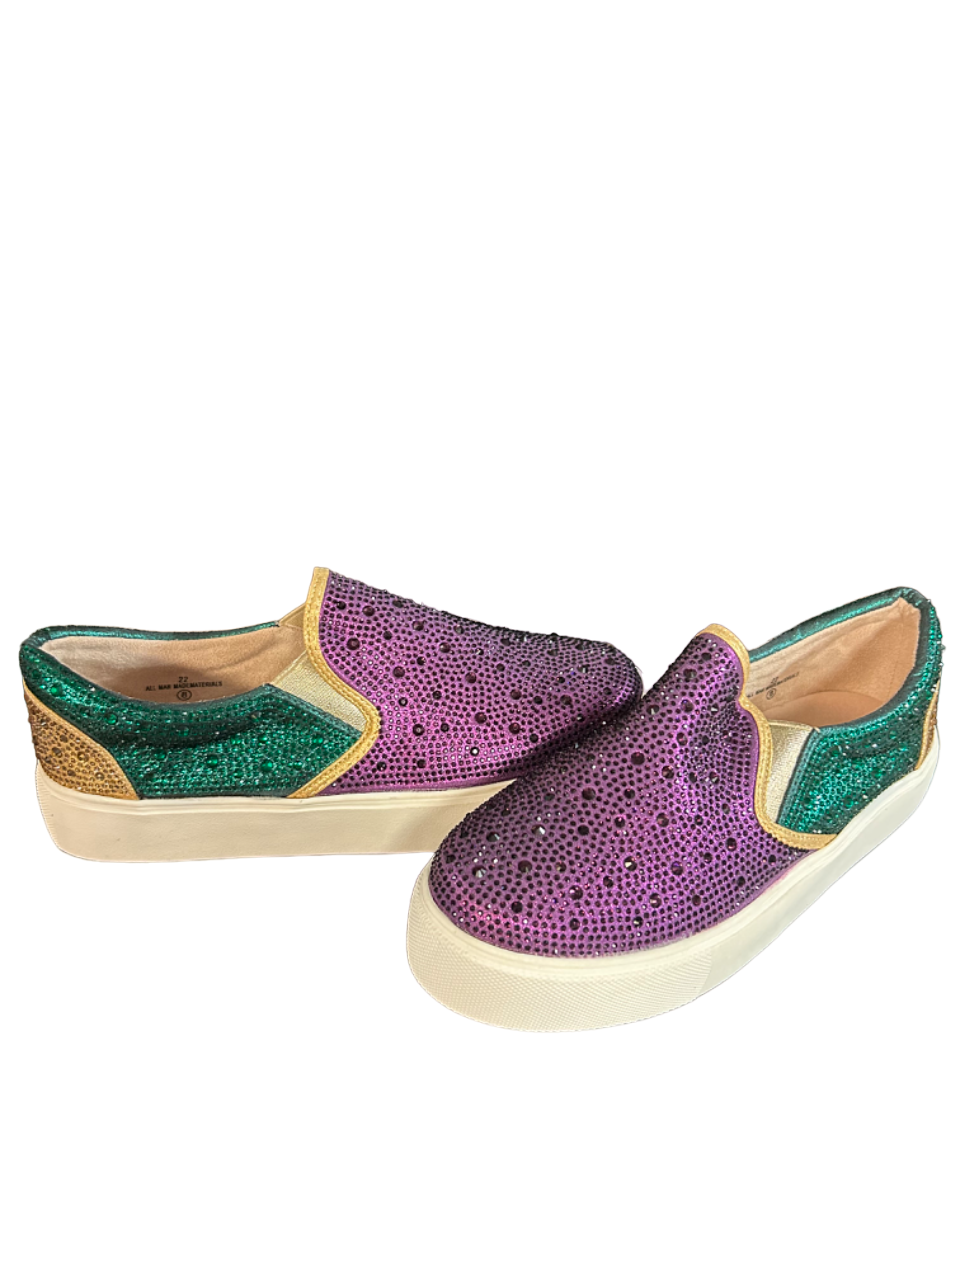 Purple, Green and Gold Slip on Shoe